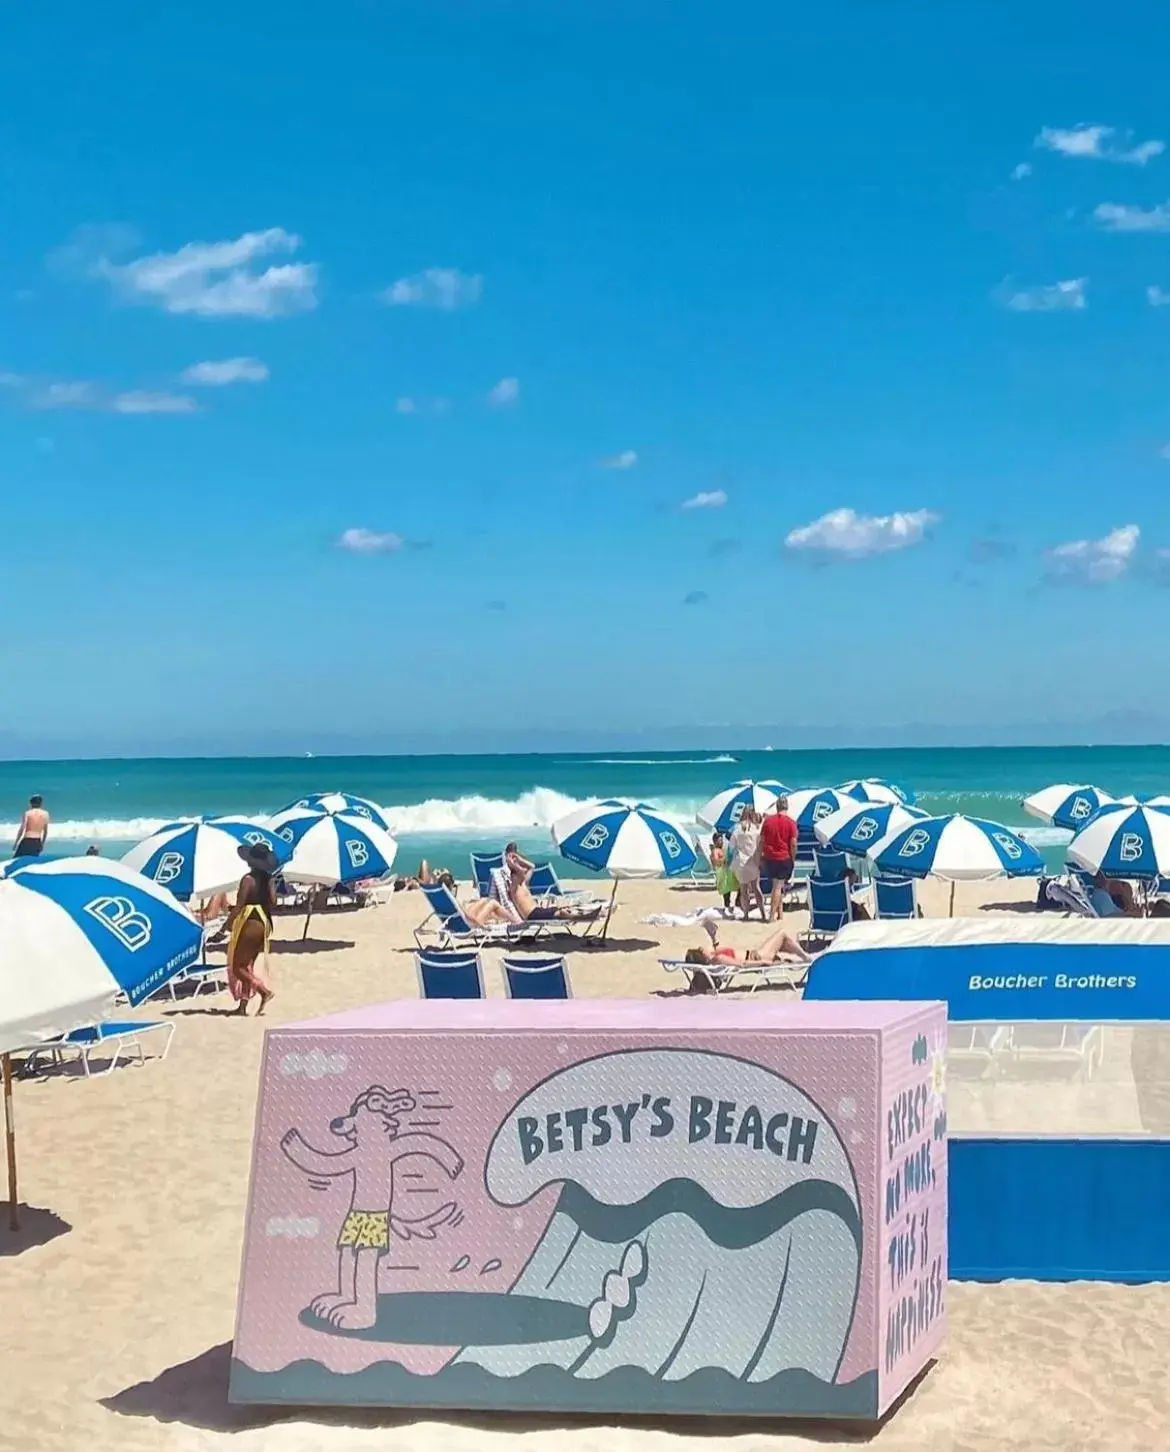 Beach in The Betsy Hotel, South Beach